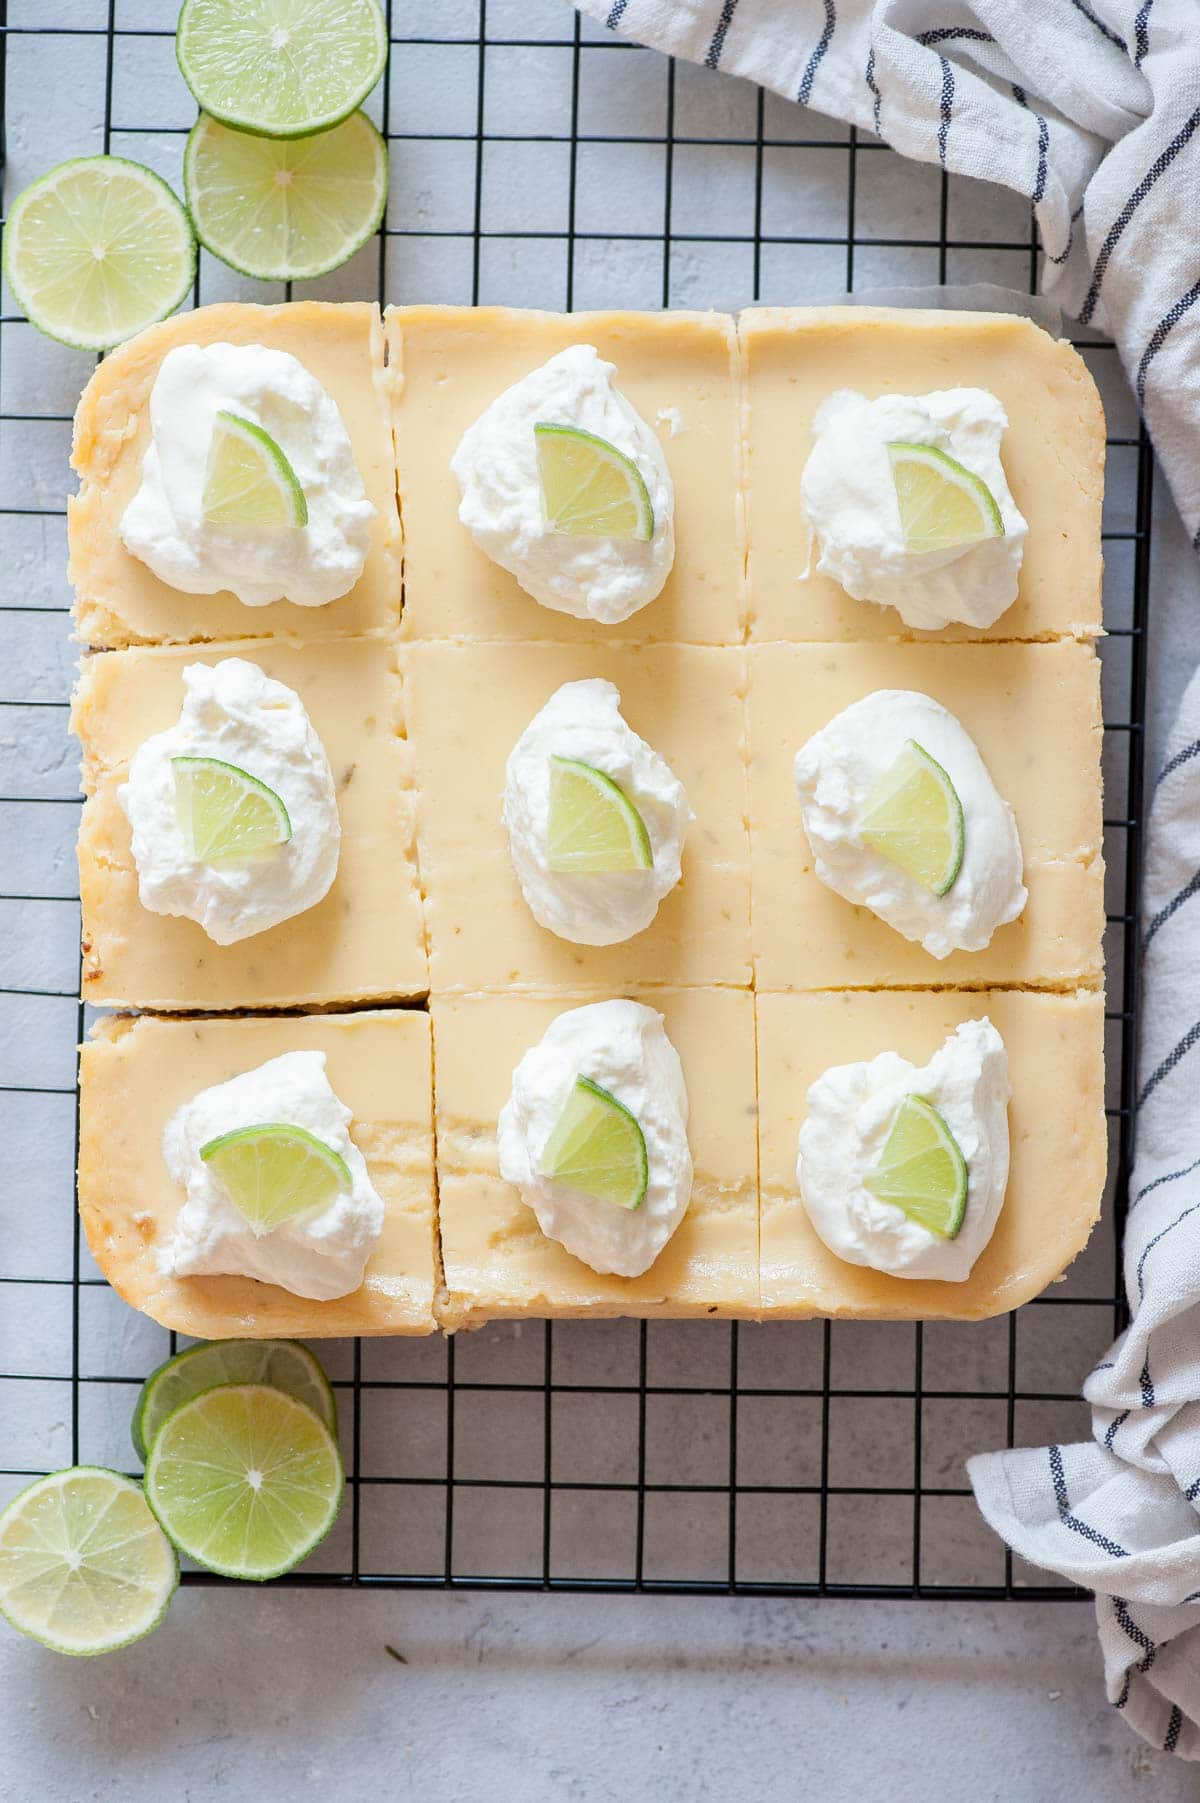 Key lime pie bars topped with whipped cream and lime slices on a cooling rack.